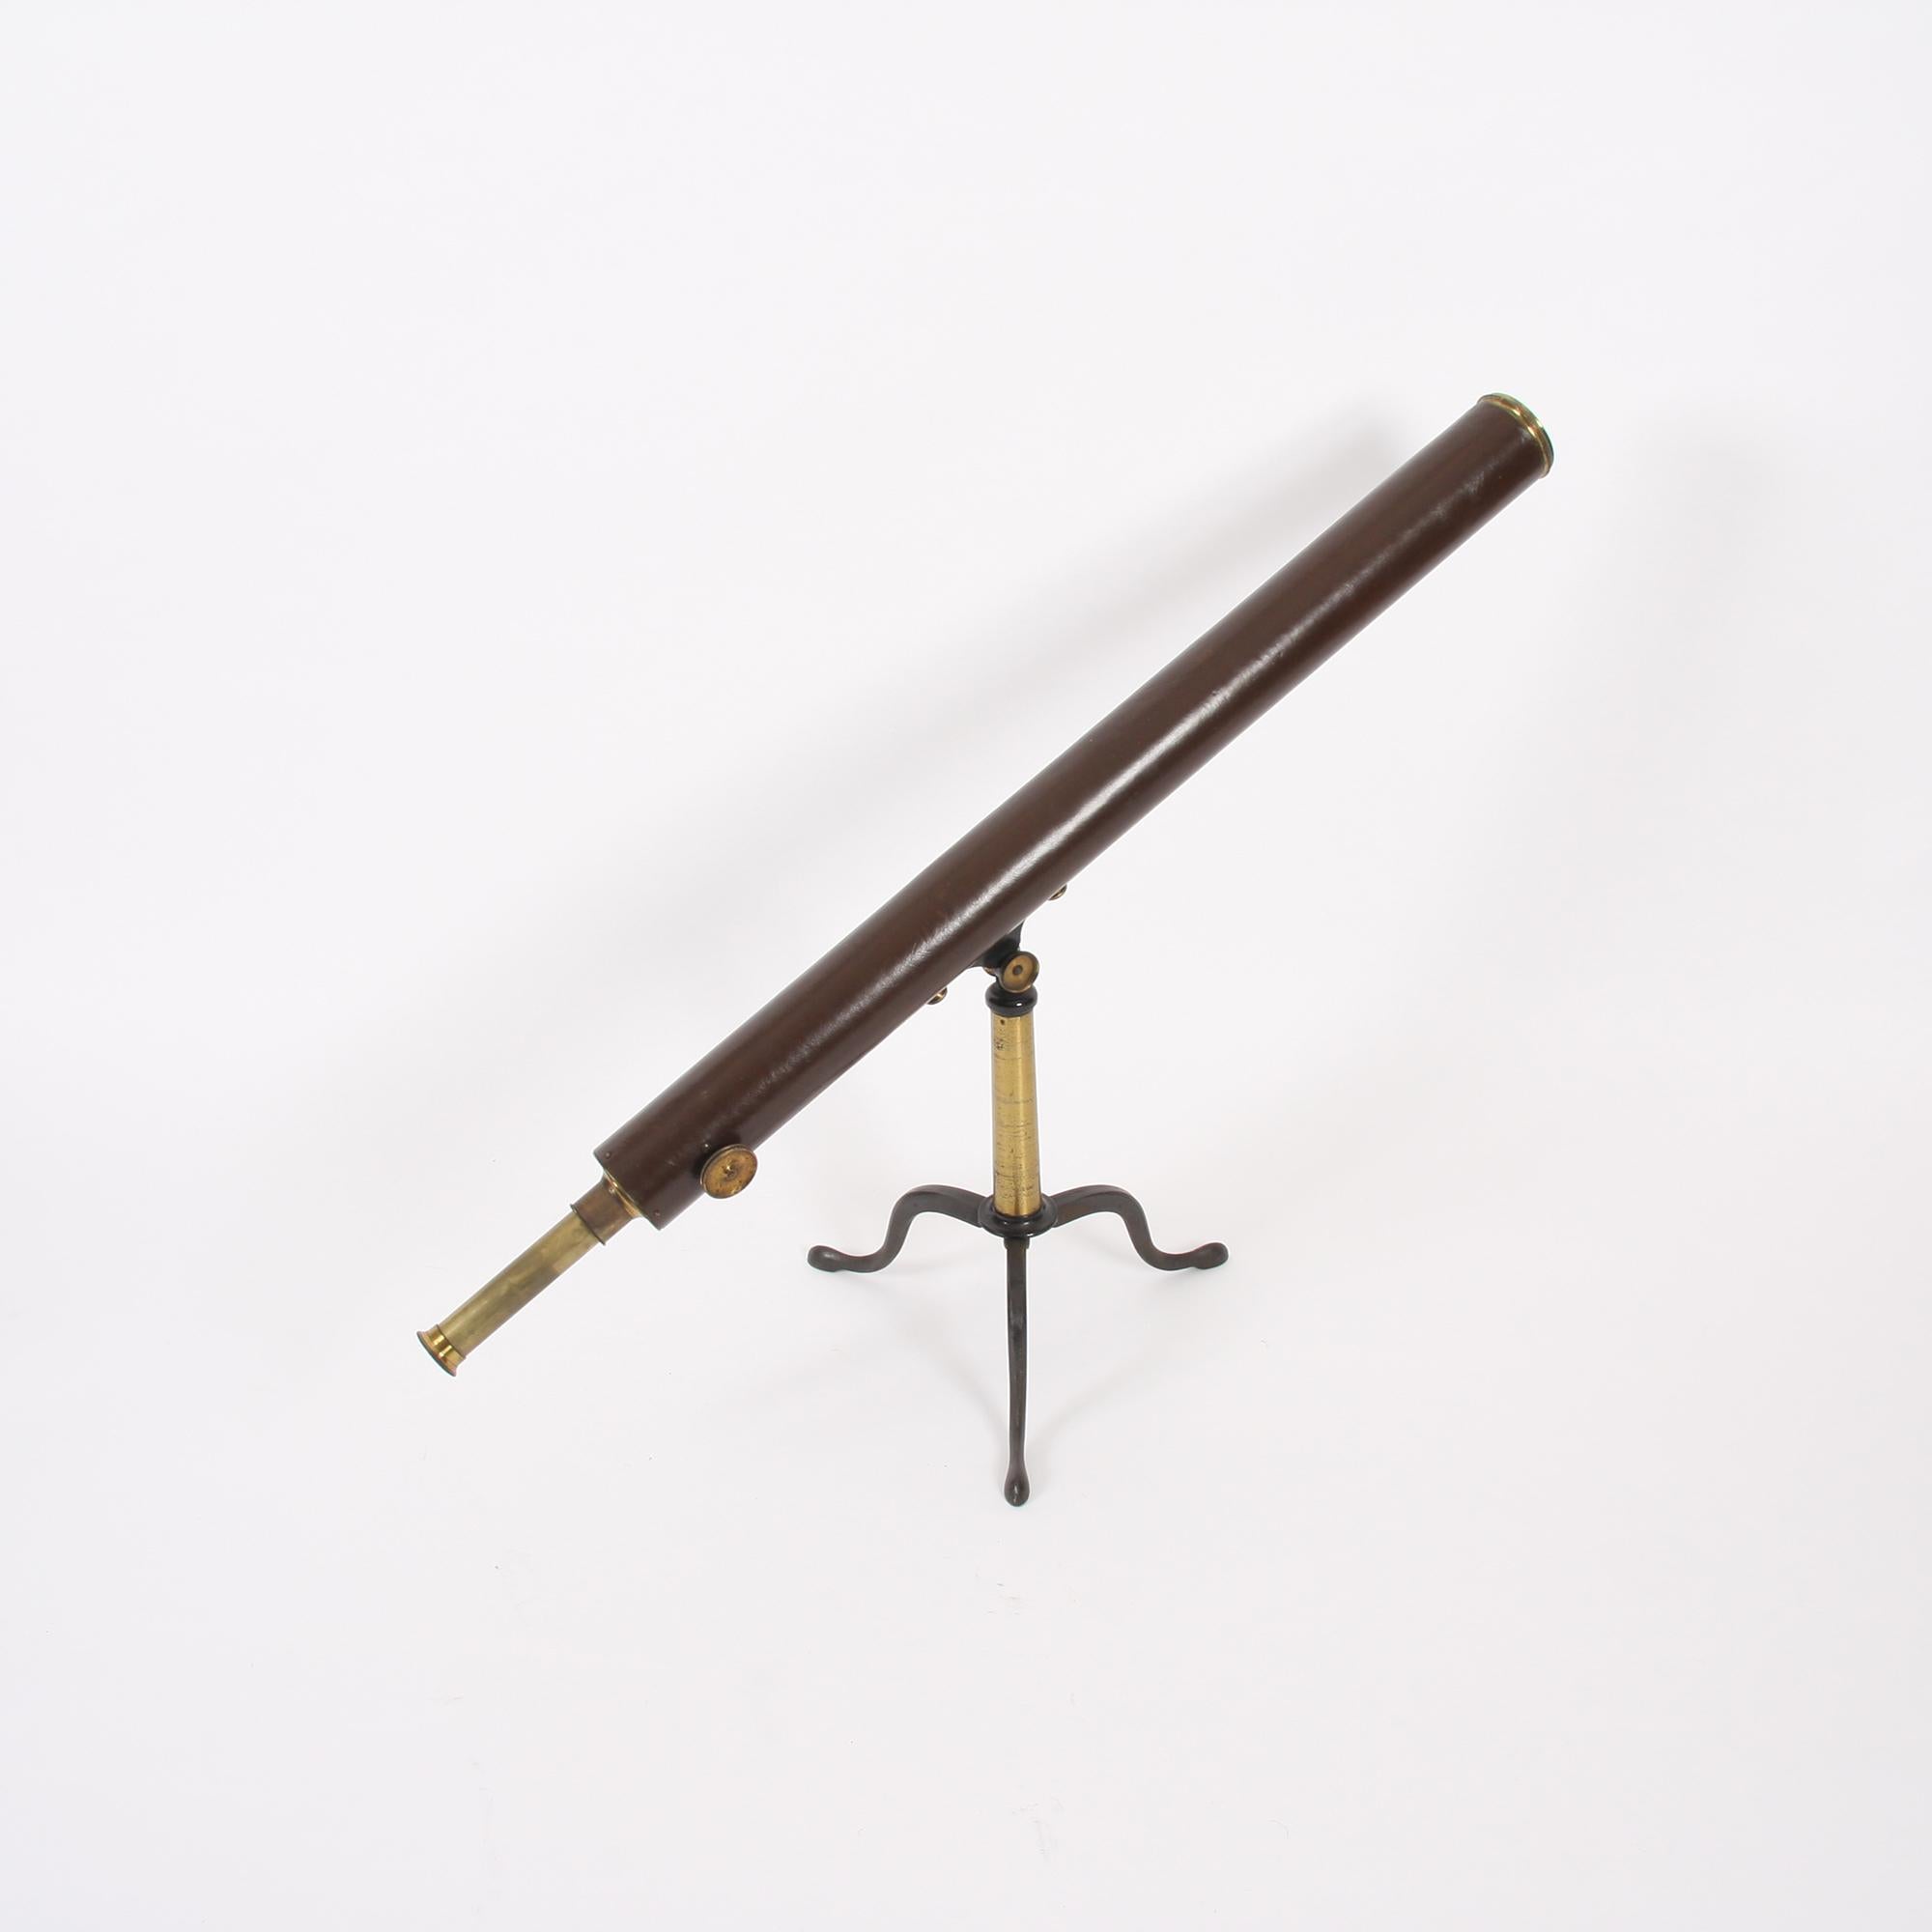 This wonderful brass and leather-wrapped telescope by the Welsh maker Fedele Primavesi & Sons dates back to the 19th century.

(Length when closed is 98cm, and length when fully open is 139cm. Maximum height is 51cm).